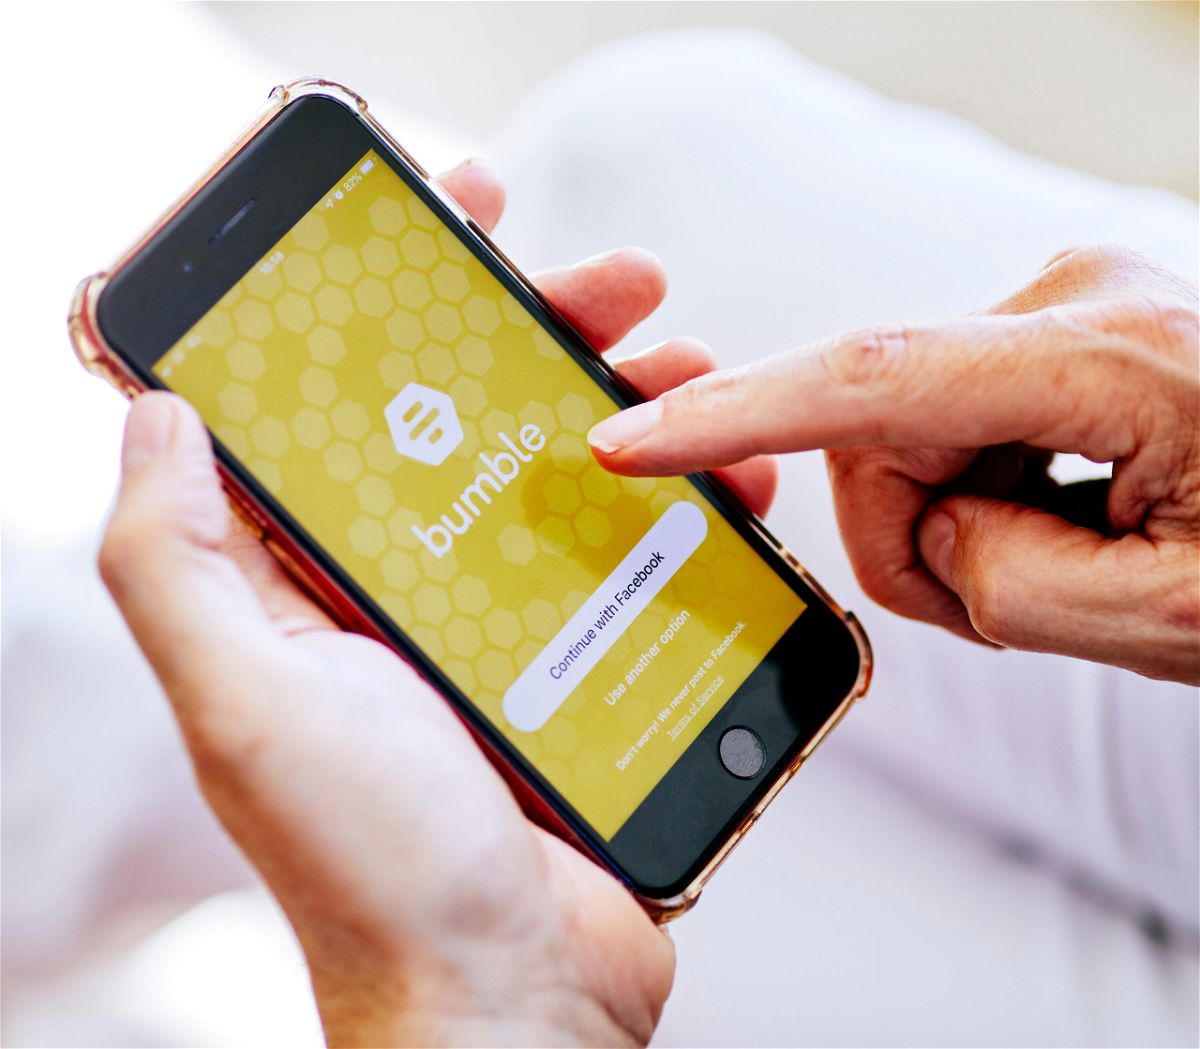 <i>Chris Rout/Alamy Stock Photo</i><br/>Tinder-owner Match Group and rival dating platform Bumble are creating relief funds for people affected by a Texas law that bans abortion from as early as six weeks into pregnancy.